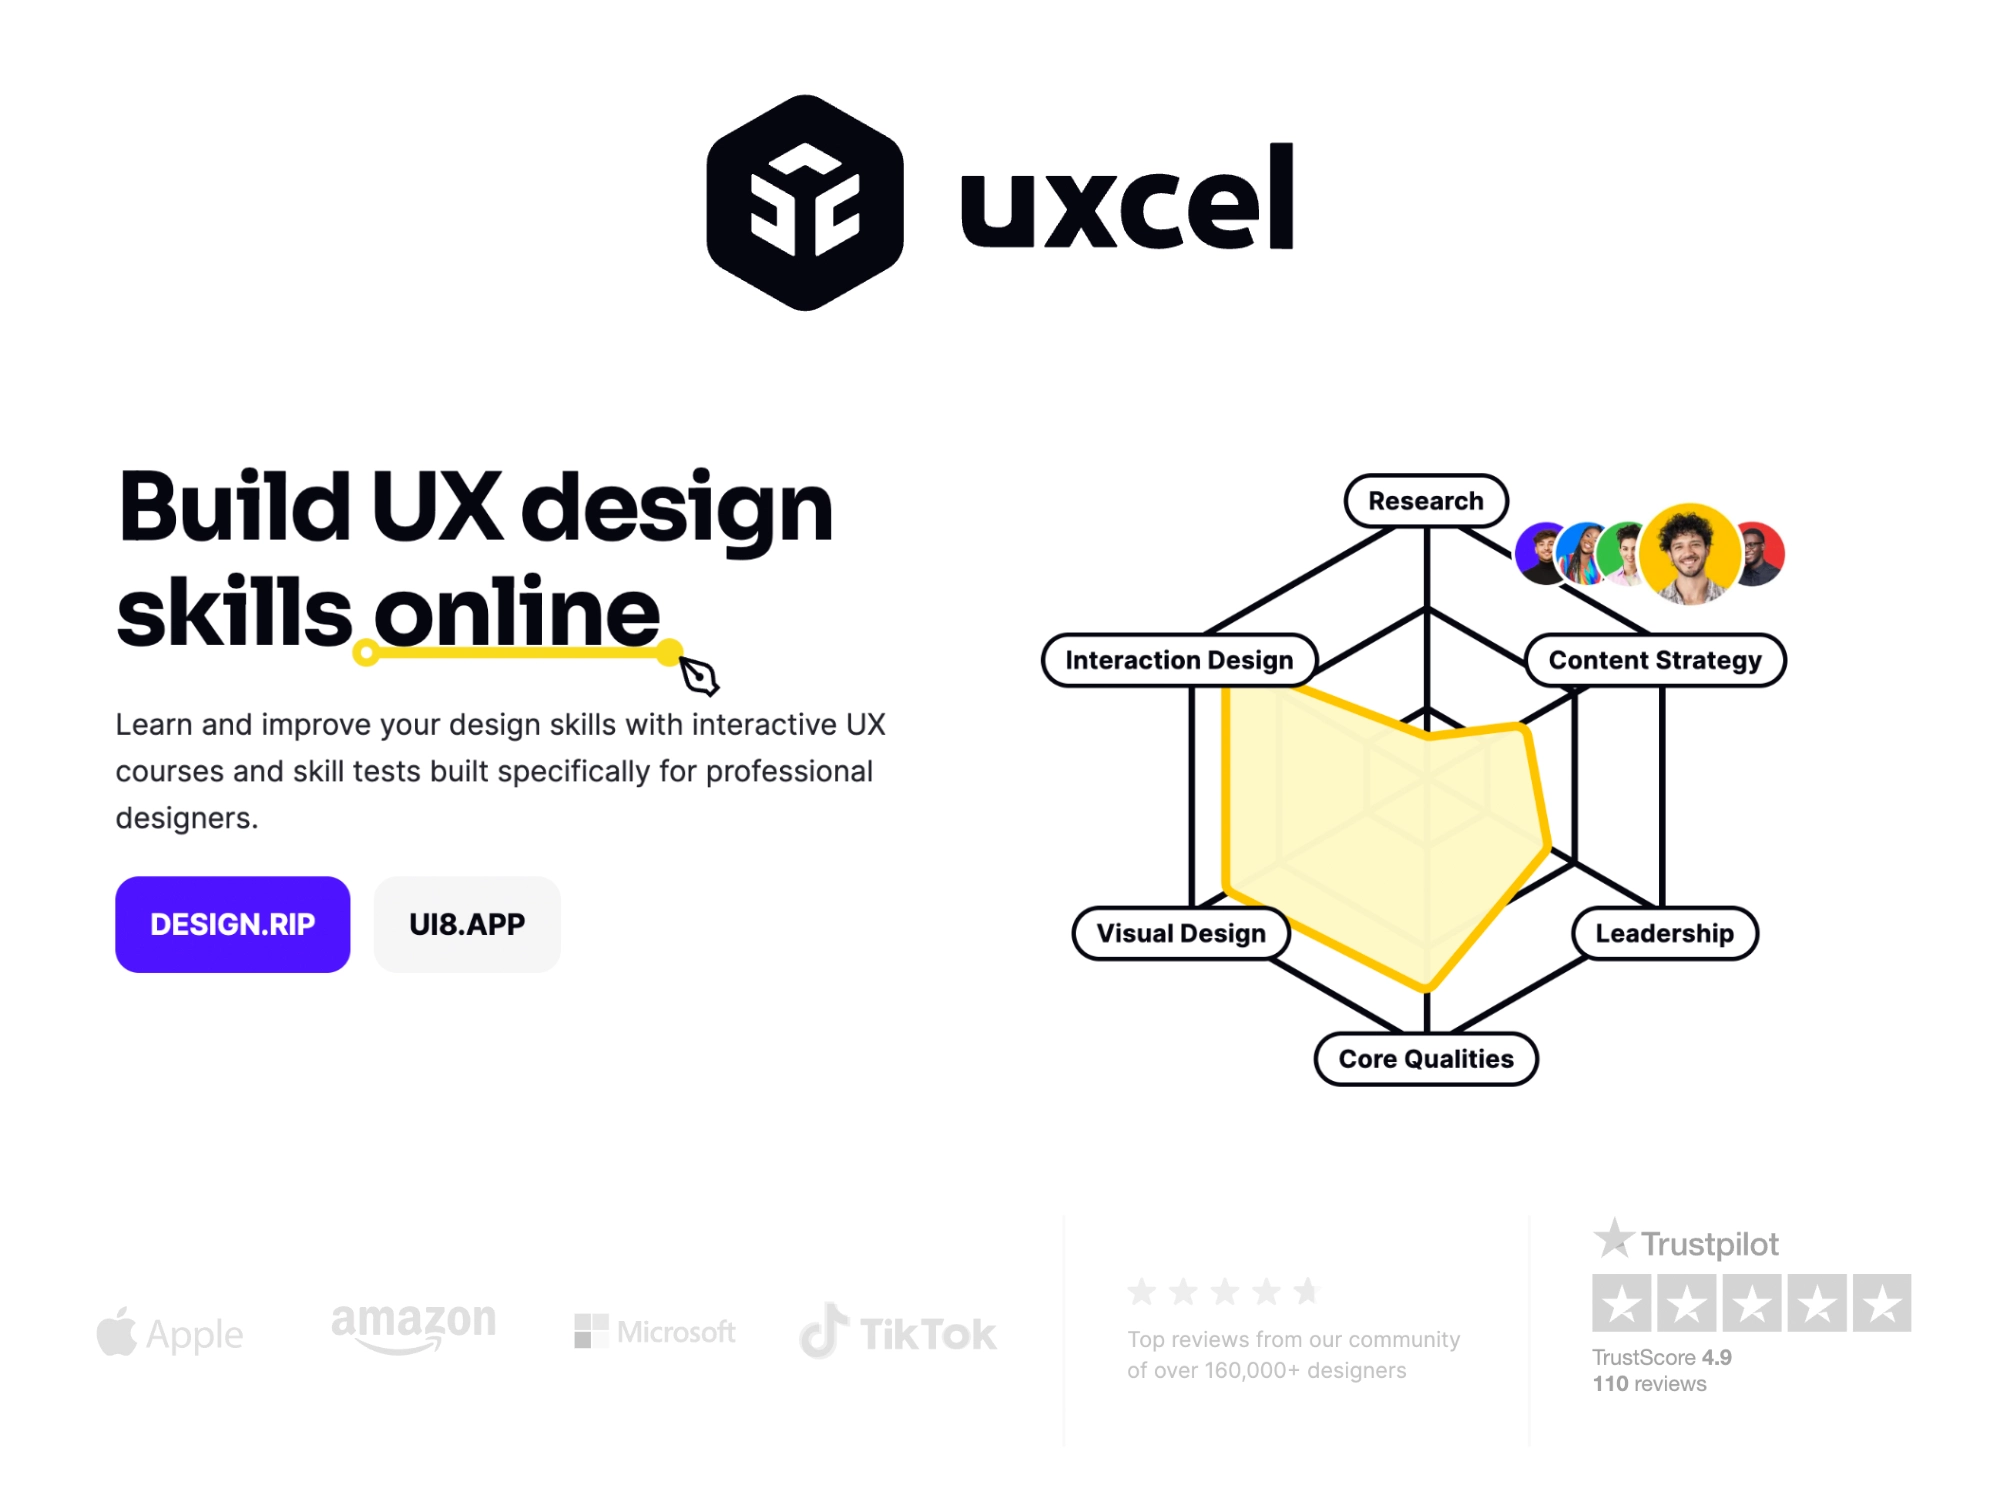 [VIP] UXCEL: UI / UX and Web Design Courses Collection